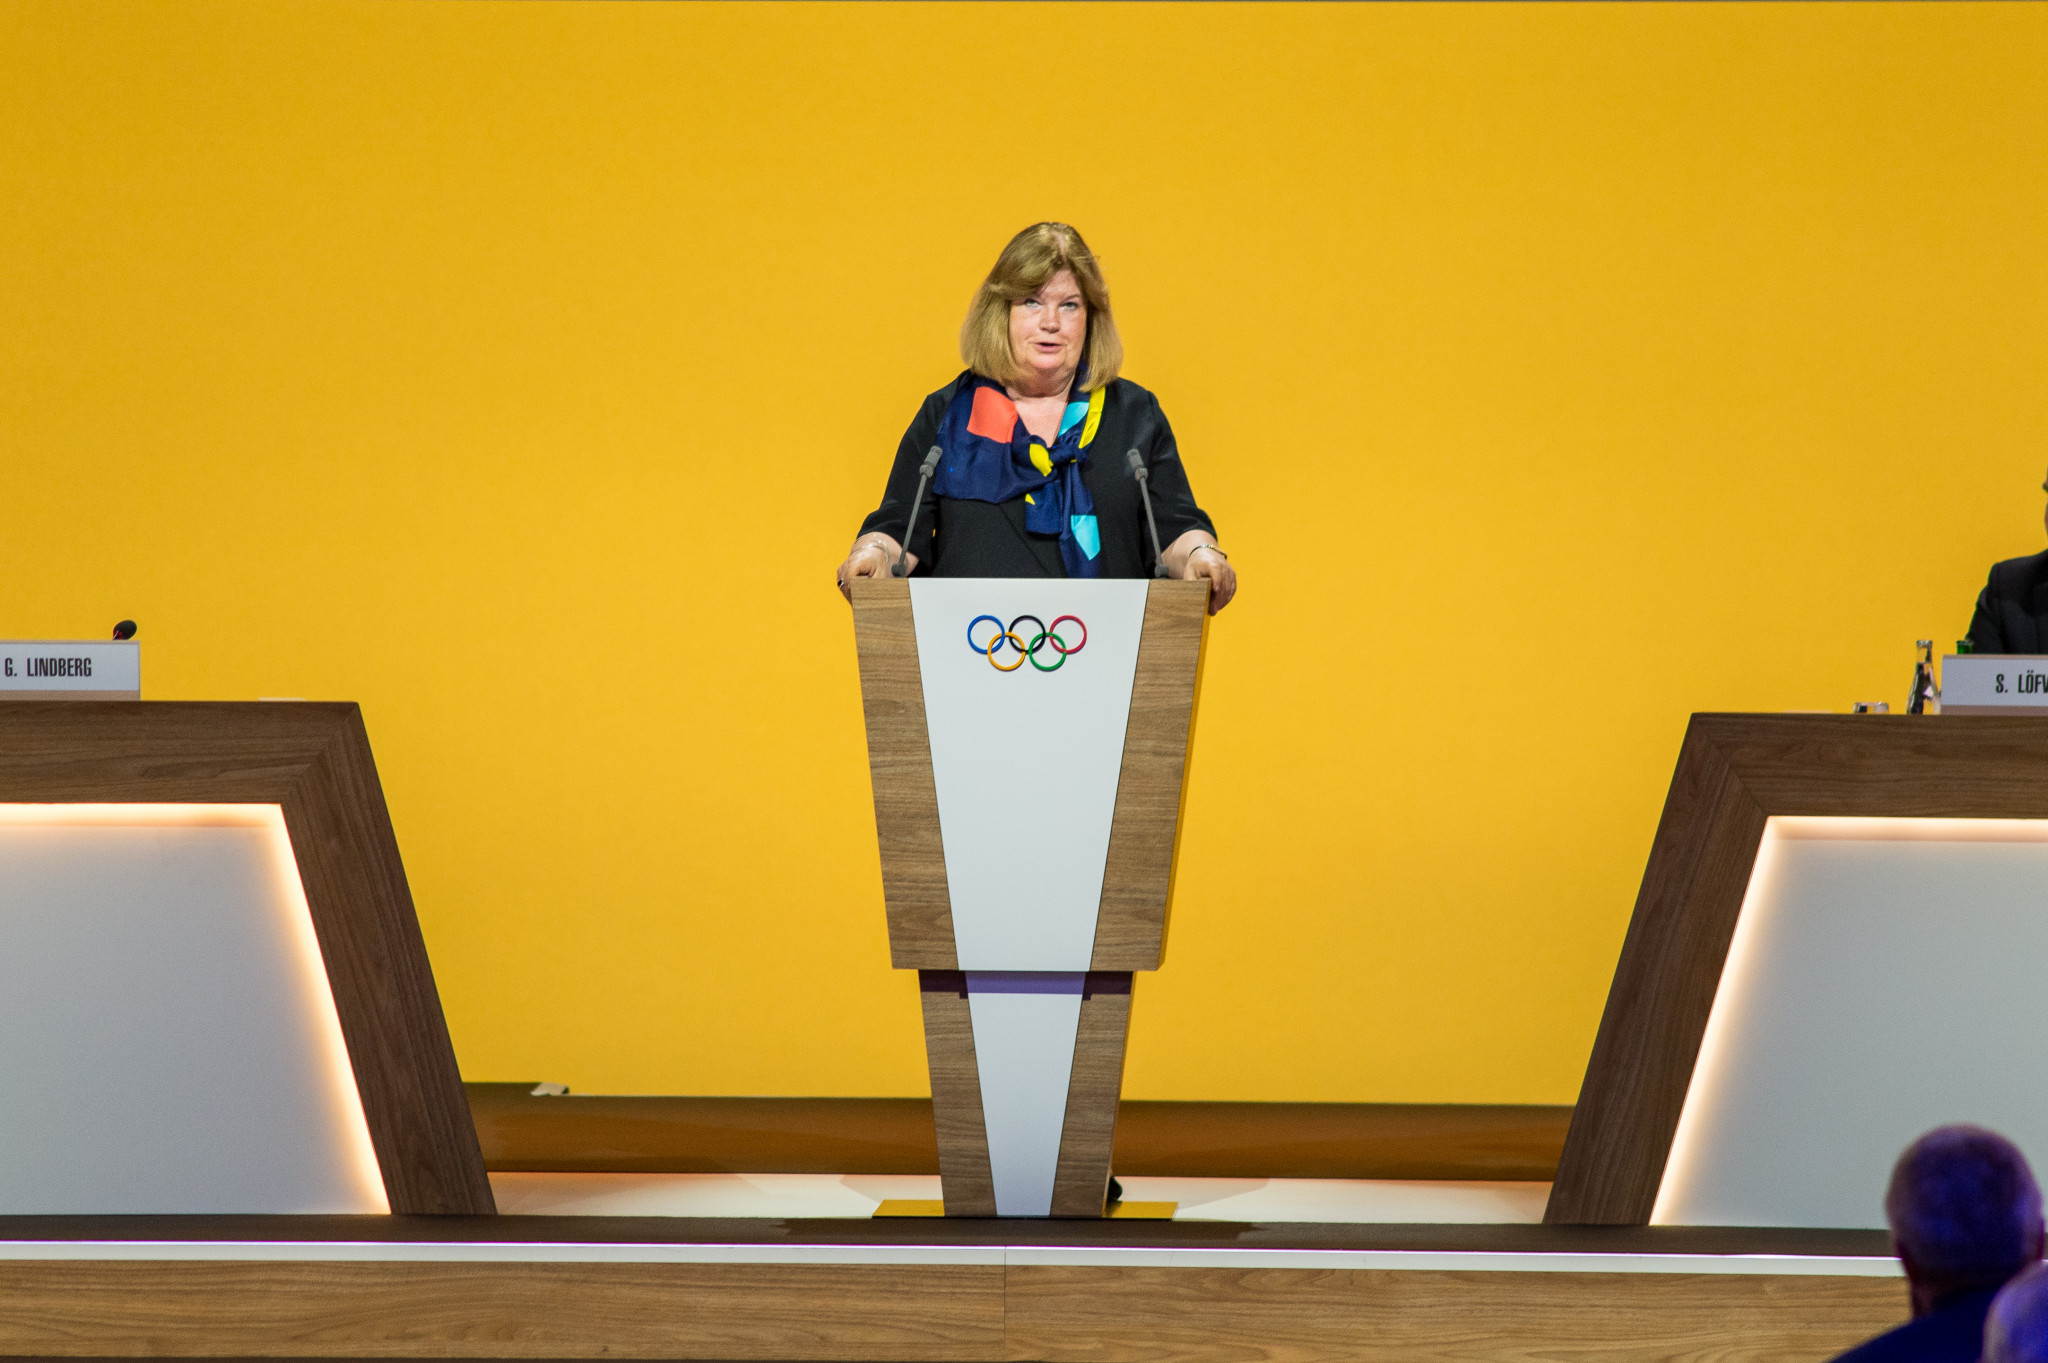 Lindberg challenges IOC members vote Stockholm Åre 2026 to prove New Norm is not just talk